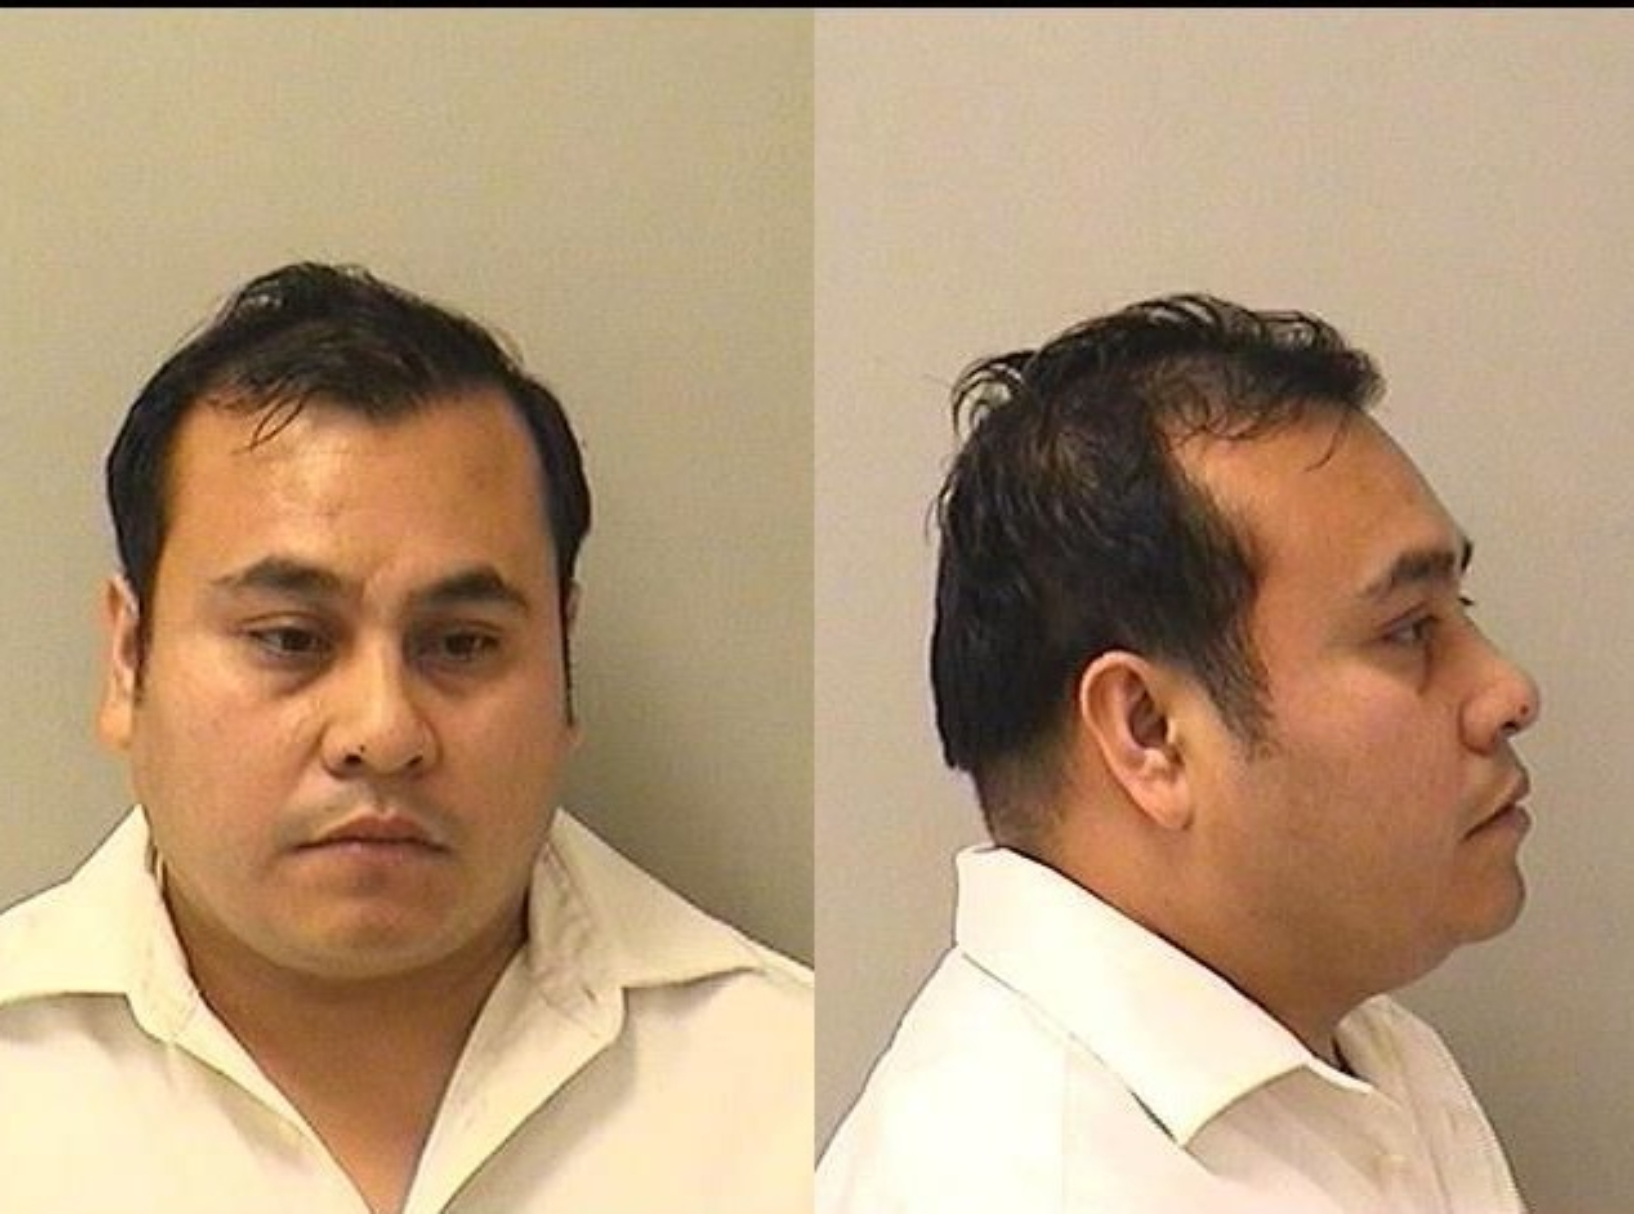 Sergio Varela, 38, of Elgin was found guilty of child sex abuse